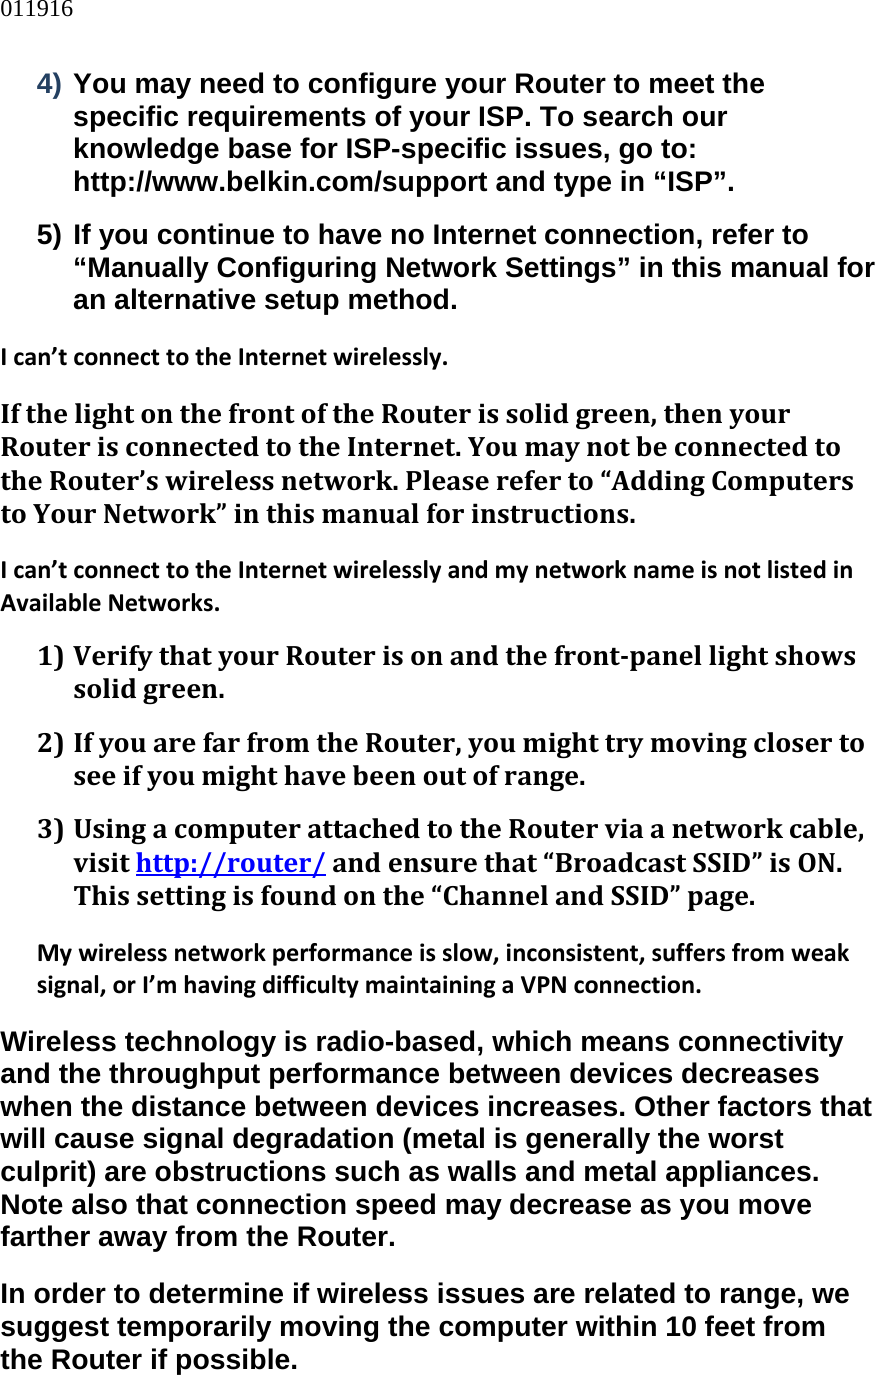 011916  4) You may need to configure your Router to meet the specific requirements of your ISP. To search our knowledge base for ISP-specific issues, go to: http://www.belkin.com/support and type in “ISP”. 5) If you continue to have no Internet connection, refer to “Manually Configuring Network Settings” in this manual for an alternative setup method. Ican’tconnecttotheInternetwirelessly.IfthelightonthefrontoftheRouterissolidgreen,thenyourRouterisconnectedtotheInternet.YoumaynotbeconnectedtotheRouter’swirelessnetwork.Pleasereferto“AddingComputerstoYourNetwork”inthismanualforinstructions.Ican’tconnecttotheInternetwirelesslyandmynetworknameisnotlistedinAvailableNetworks.1) VerifythatyourRouterisonandthefrontpanellightshowssolidgreen.2) IfyouarefarfromtheRouter,youmighttrymovingclosertoseeifyoumighthavebeenoutofrange.3) UsingacomputerattachedtotheRouterviaanetworkcable,visithttp://router/andensurethat“BroadcastSSID”isON.Thissettingisfoundonthe“ChannelandSSID”page.Mywirelessnetworkperformanceisslow,inconsistent,suffersfromweaksignal,orI’mhavingdifficultymaintainingaVPNconnection.Wireless technology is radio-based, which means connectivity and the throughput performance between devices decreases when the distance between devices increases. Other factors that will cause signal degradation (metal is generally the worst culprit) are obstructions such as walls and metal appliances. Note also that connection speed may decrease as you move farther away from the Router. In order to determine if wireless issues are related to range, we suggest temporarily moving the computer within 10 feet from the Router if possible. 